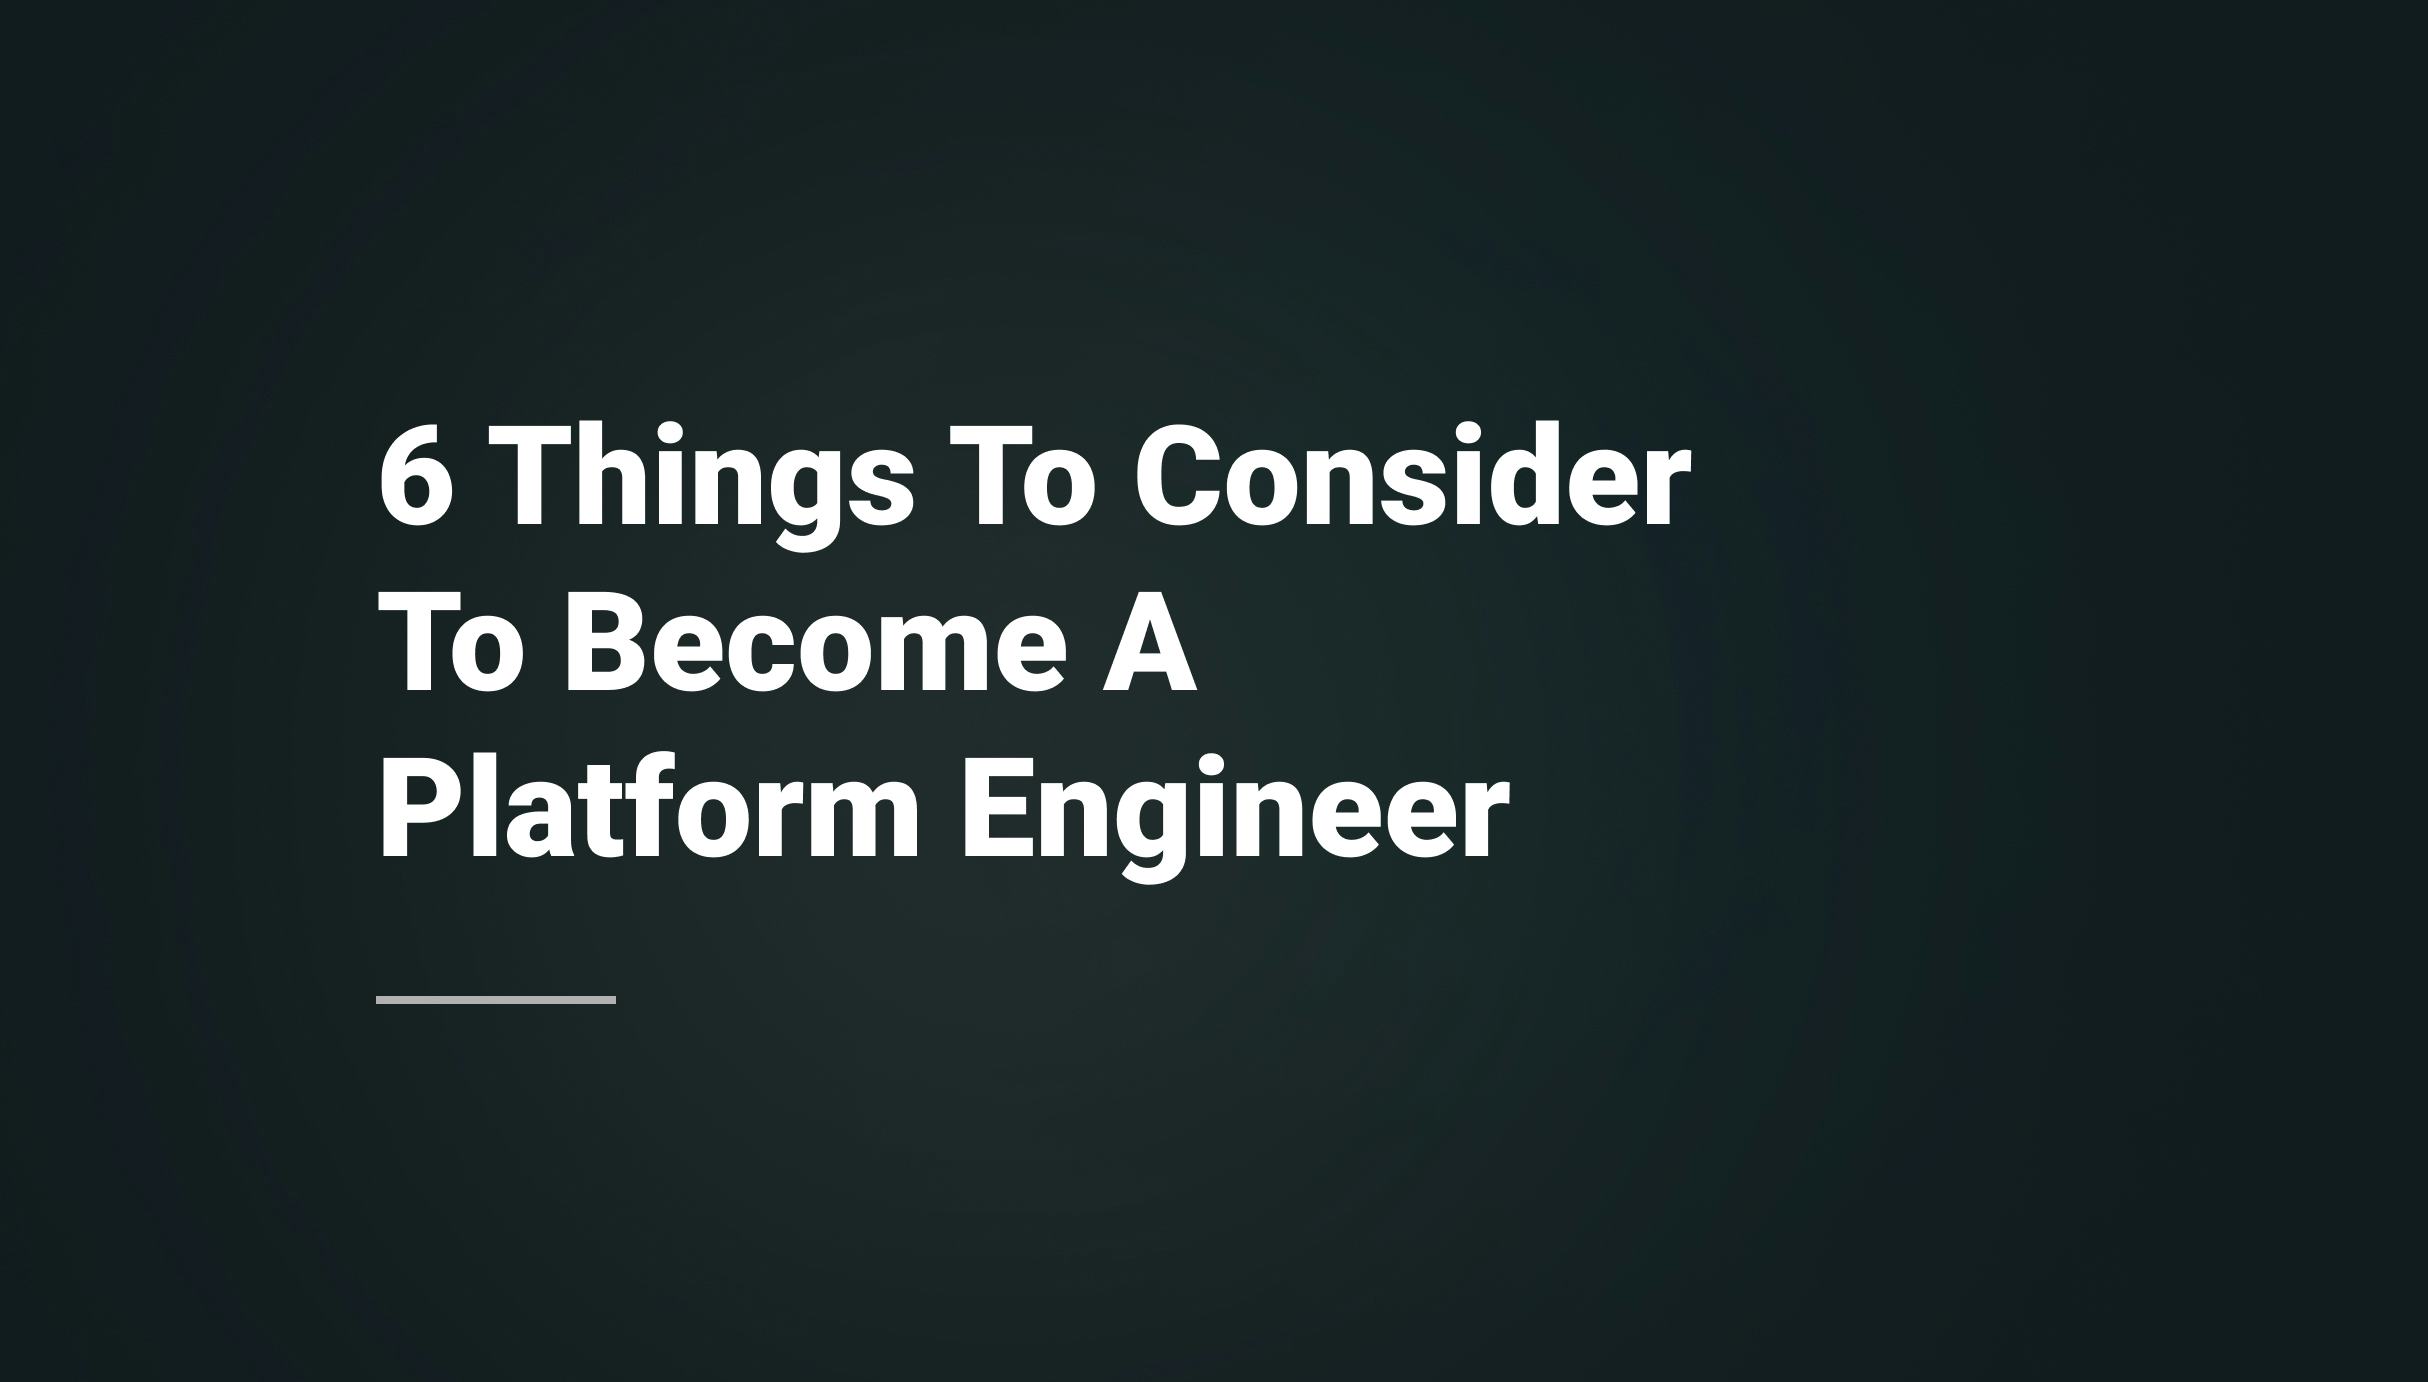 From DevOps to Platform Engineer: 6 Things You Should Consider in 2023